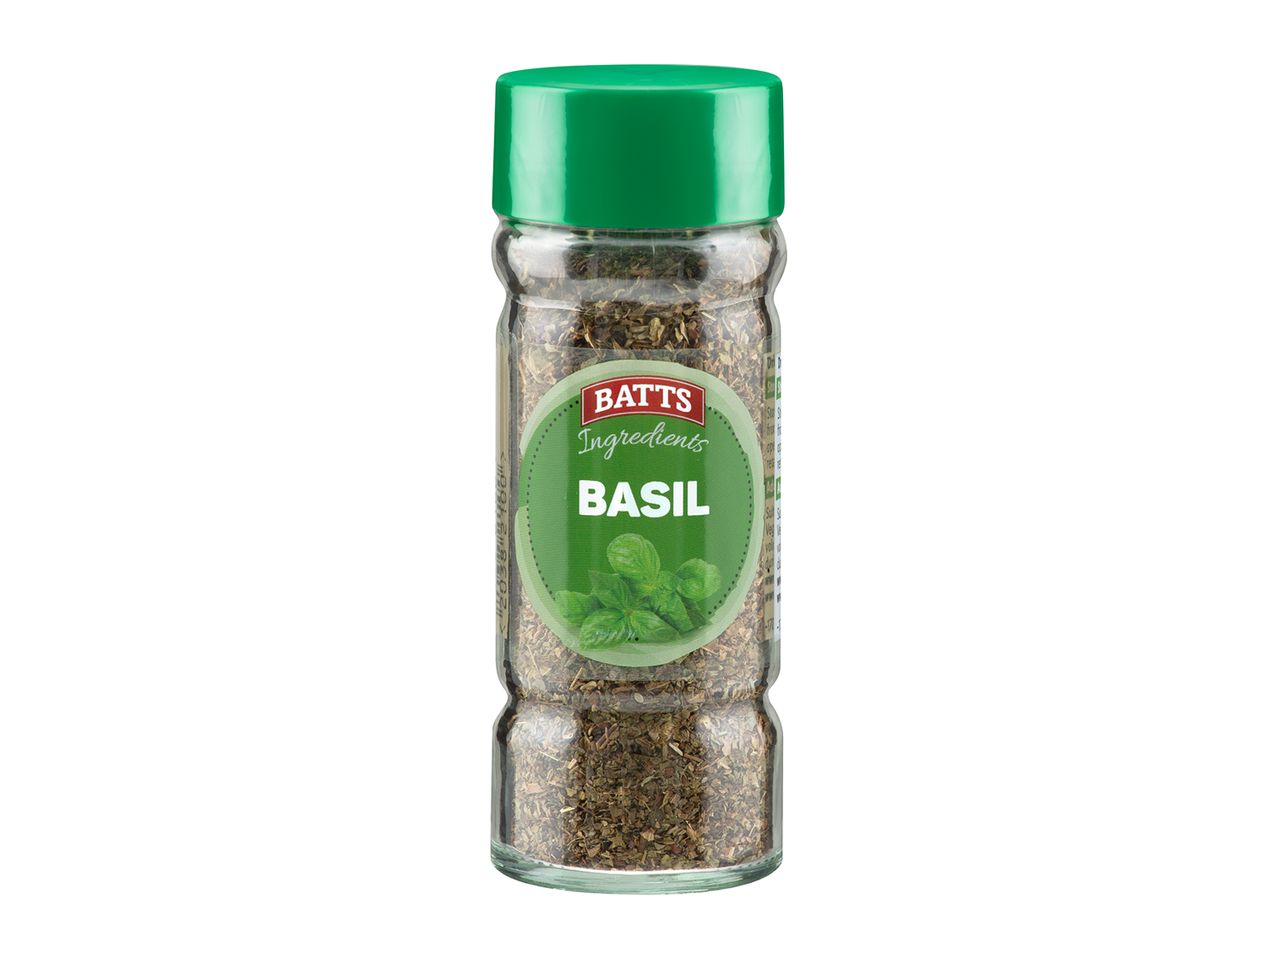 Go to full screen view: Batts Basil - Image 1